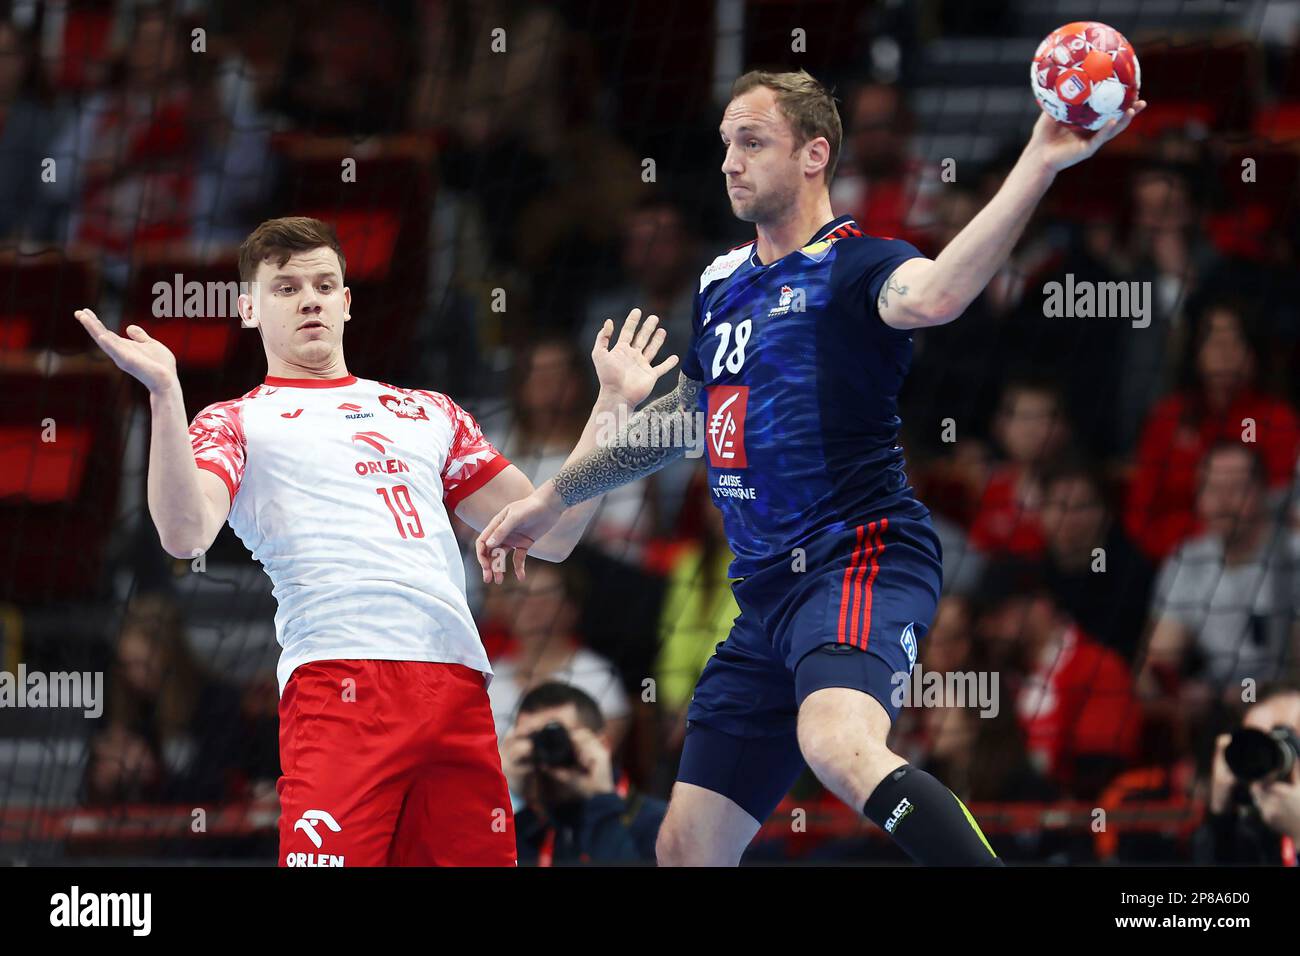 Jan Czuwara of Poland and Valentin Porte of France during the Men's EHF  Euro 2024, Qualifiers Handball match between Poland and France on March 8,  2023 at ERGO Arena in Gdansk, Poland -